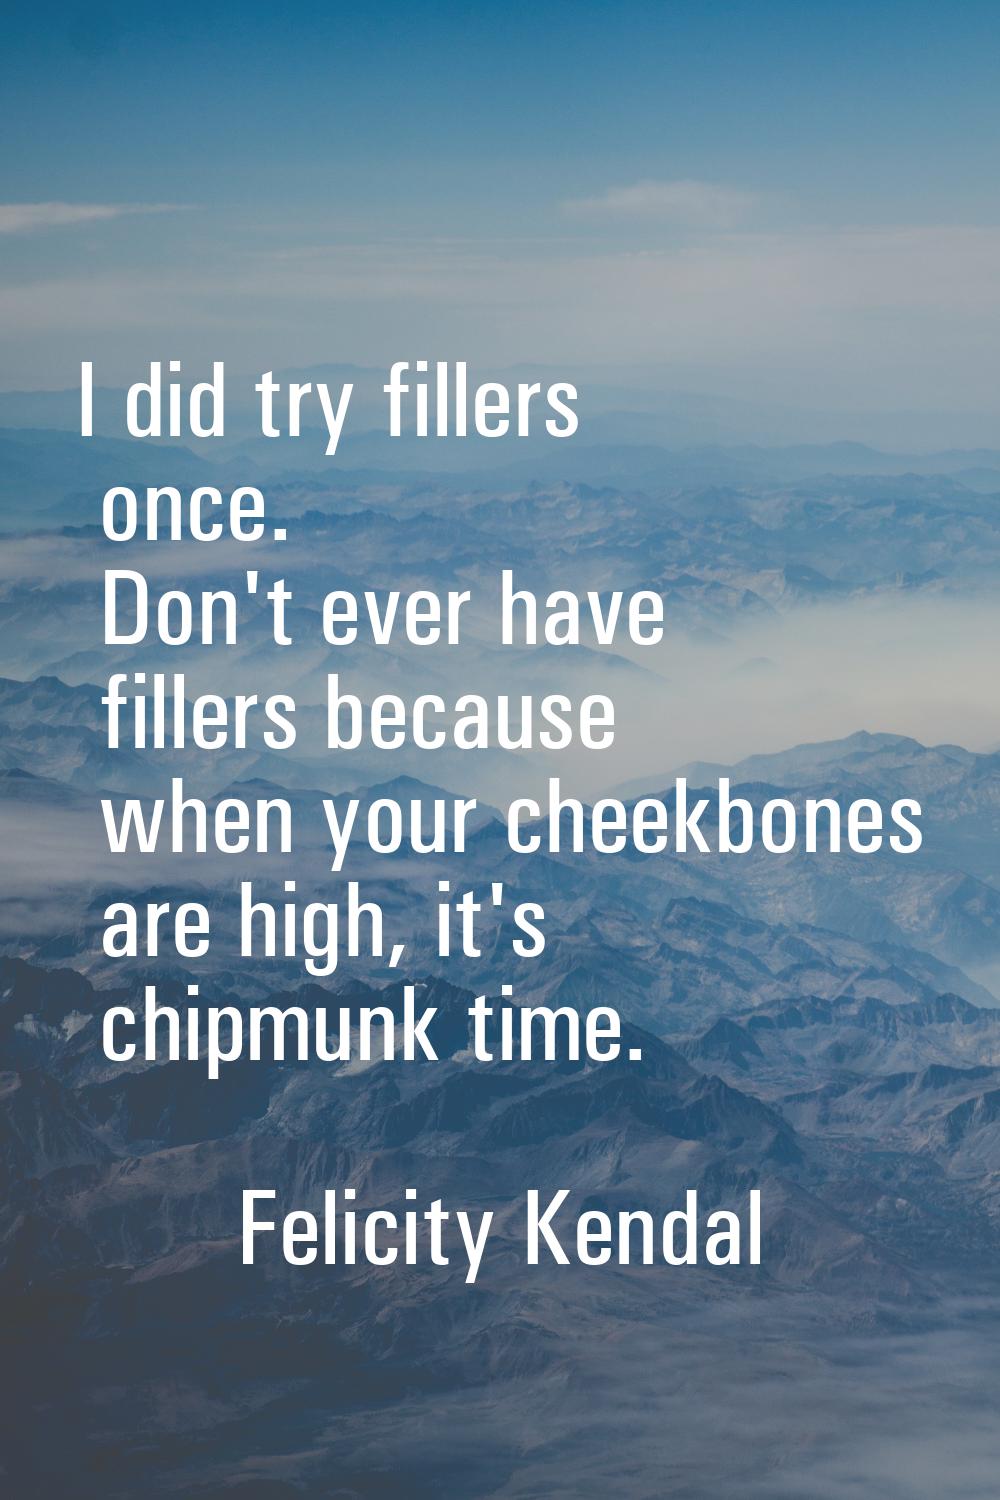 I did try fillers once. Don't ever have fillers because when your cheekbones are high, it's chipmun